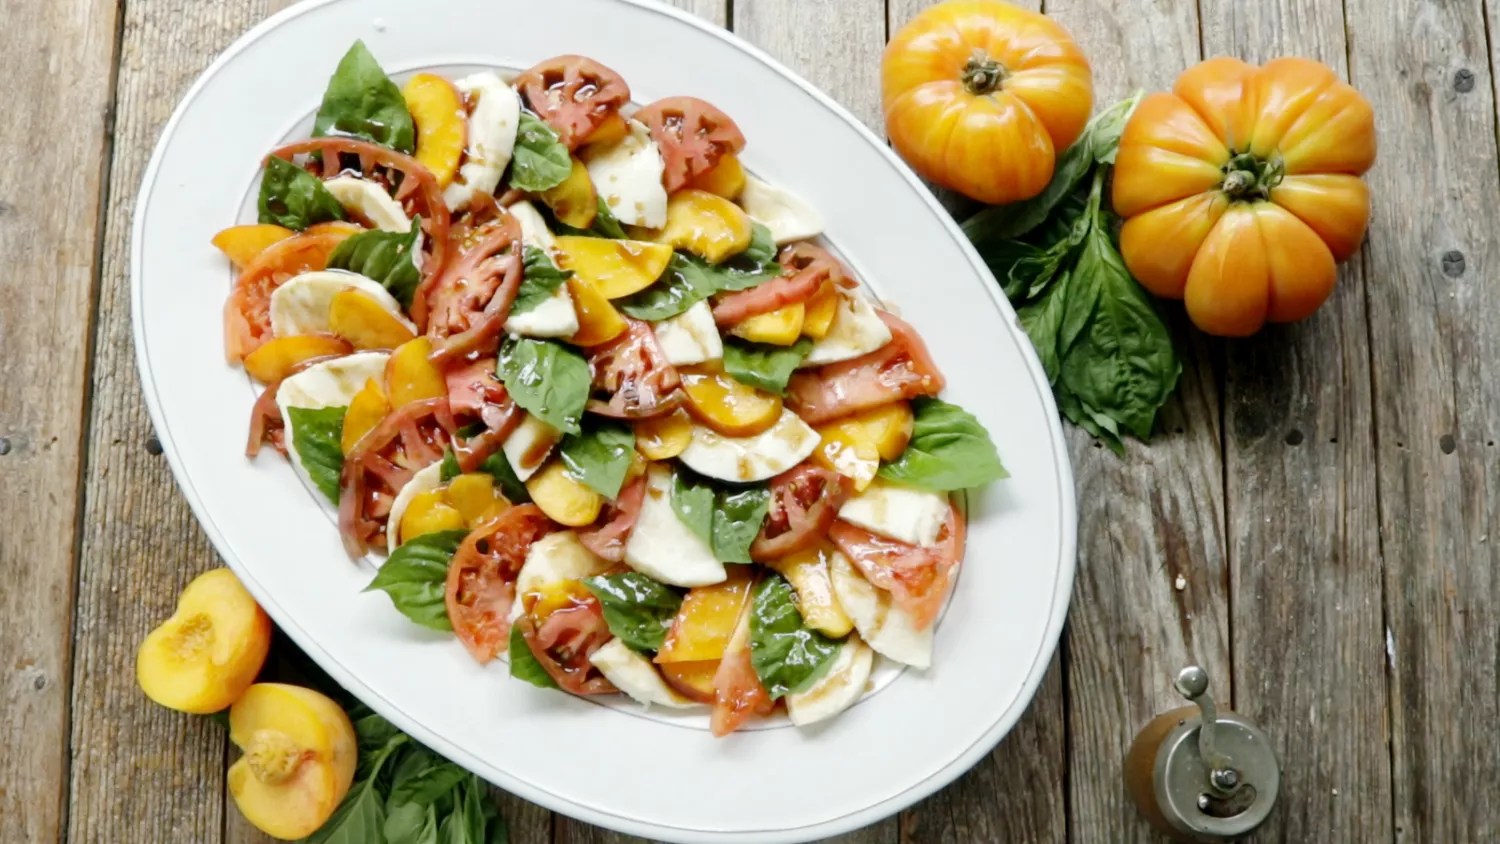 Get ready for the Ultimate Peach and Tomato Caprese Salad!